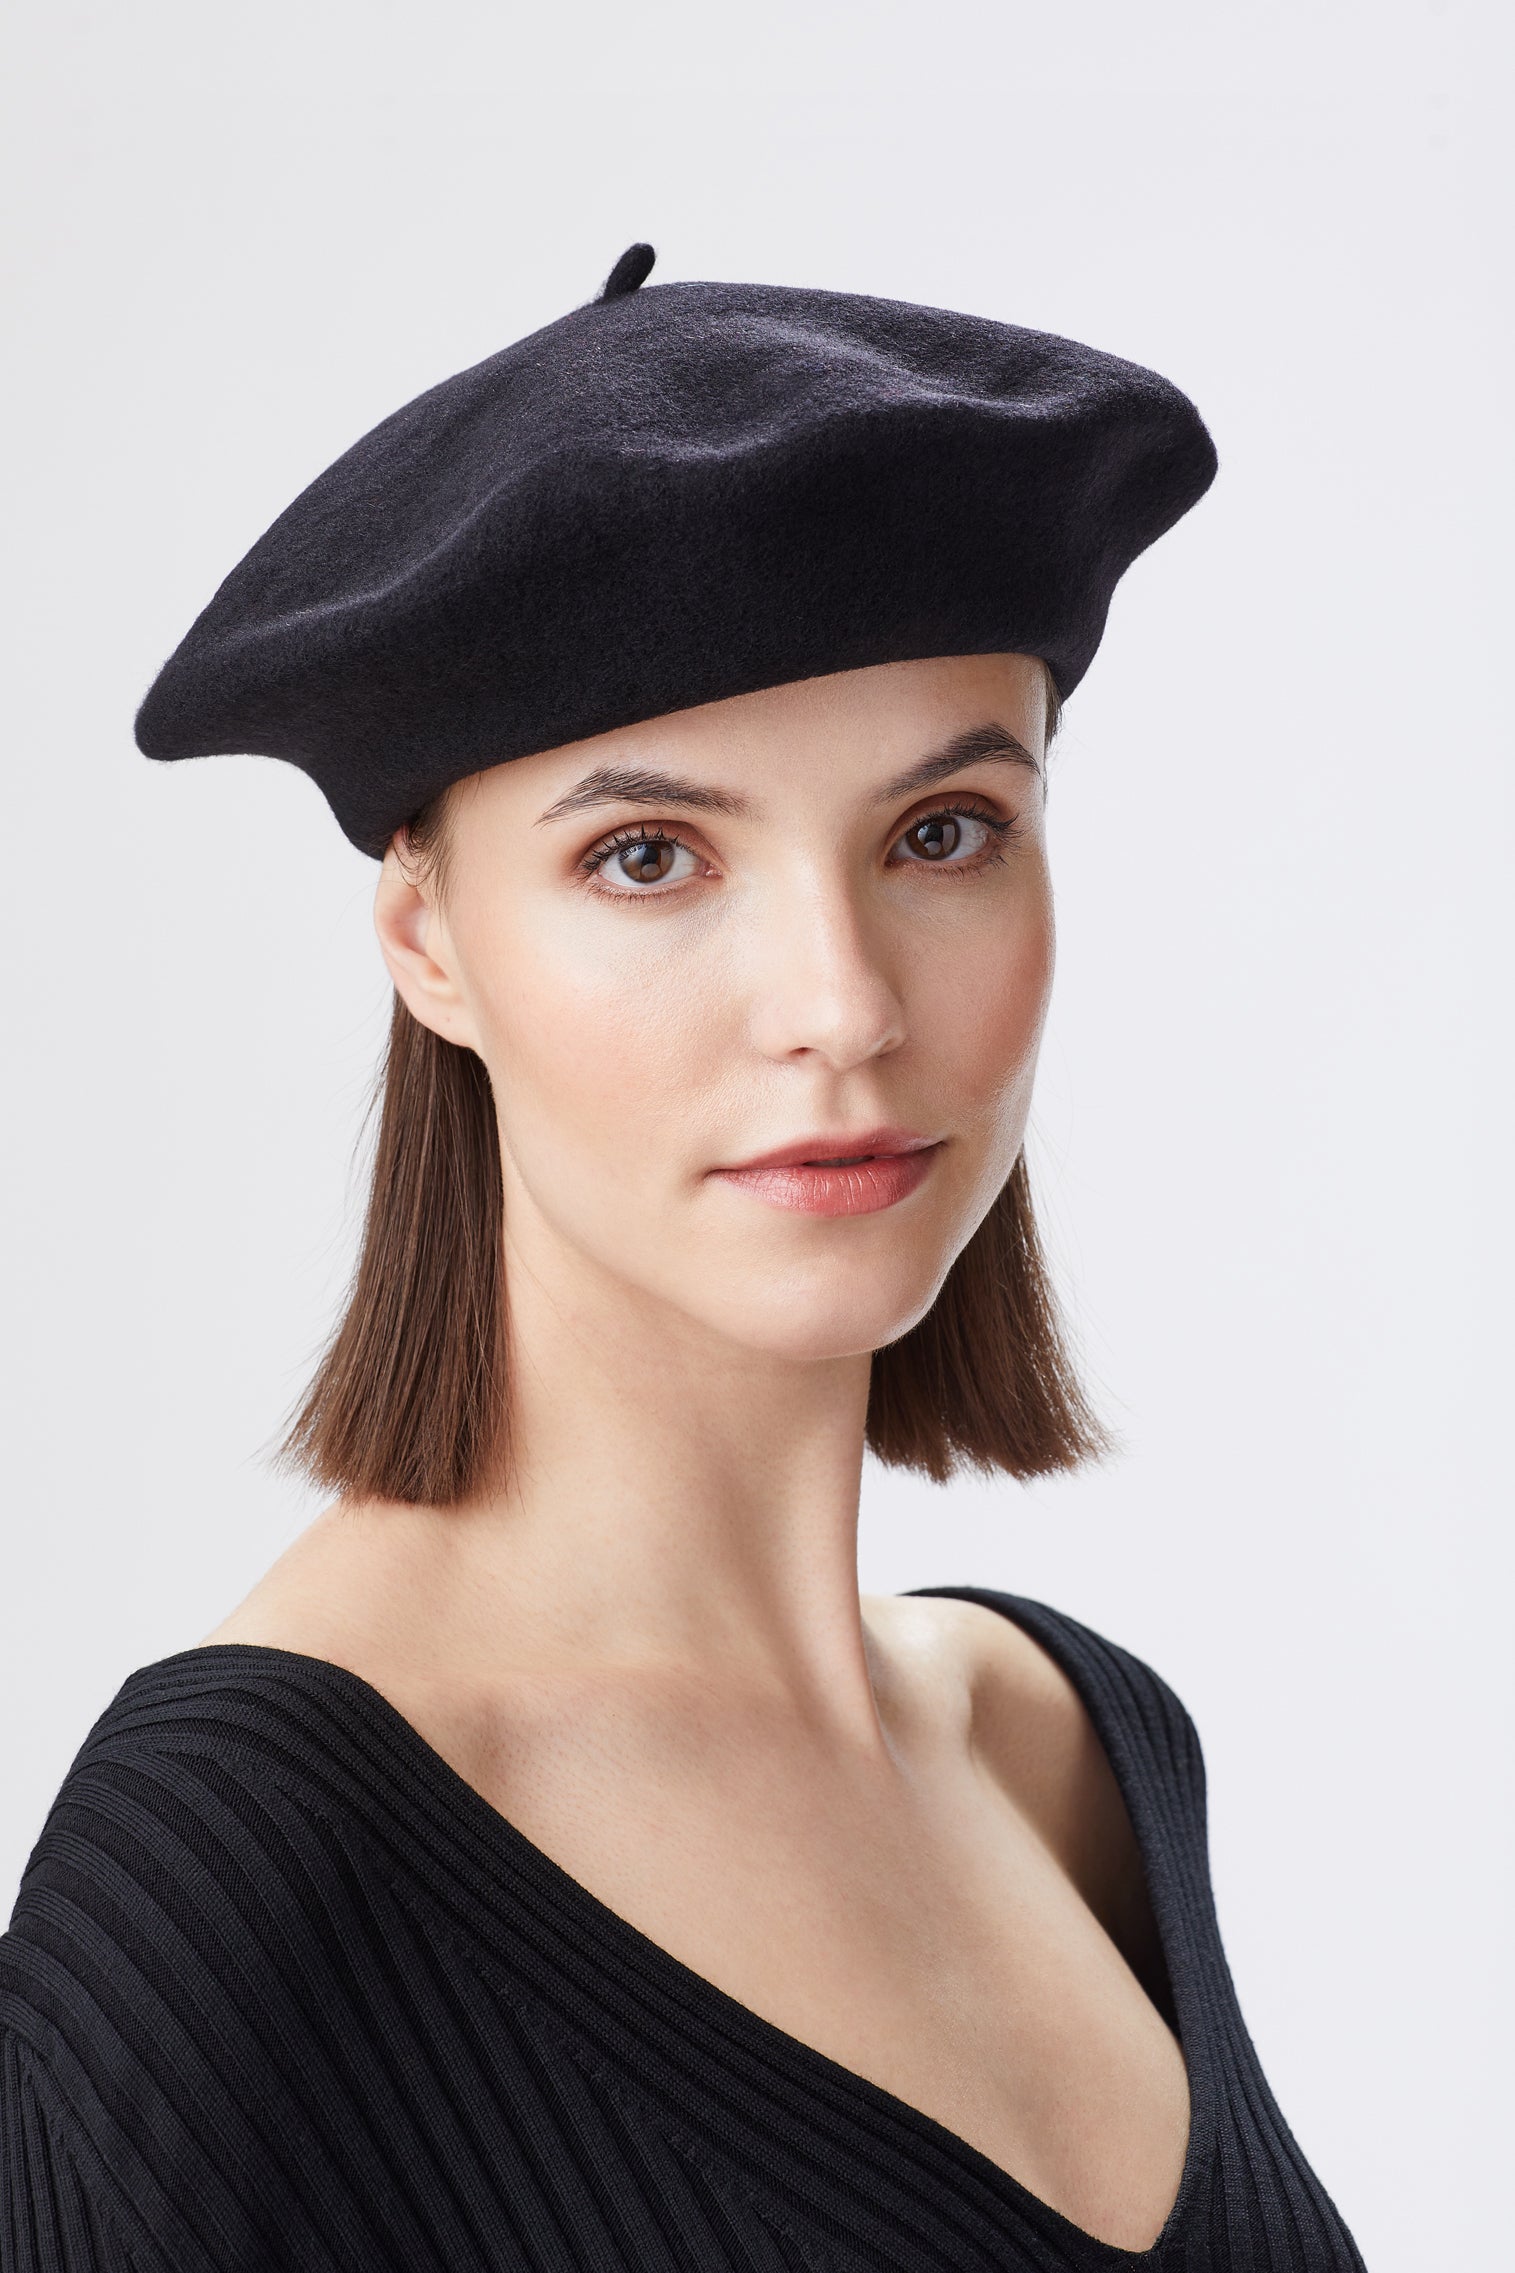 French Beret - Hats for Tall People - Lock & Co. Hatters London UK